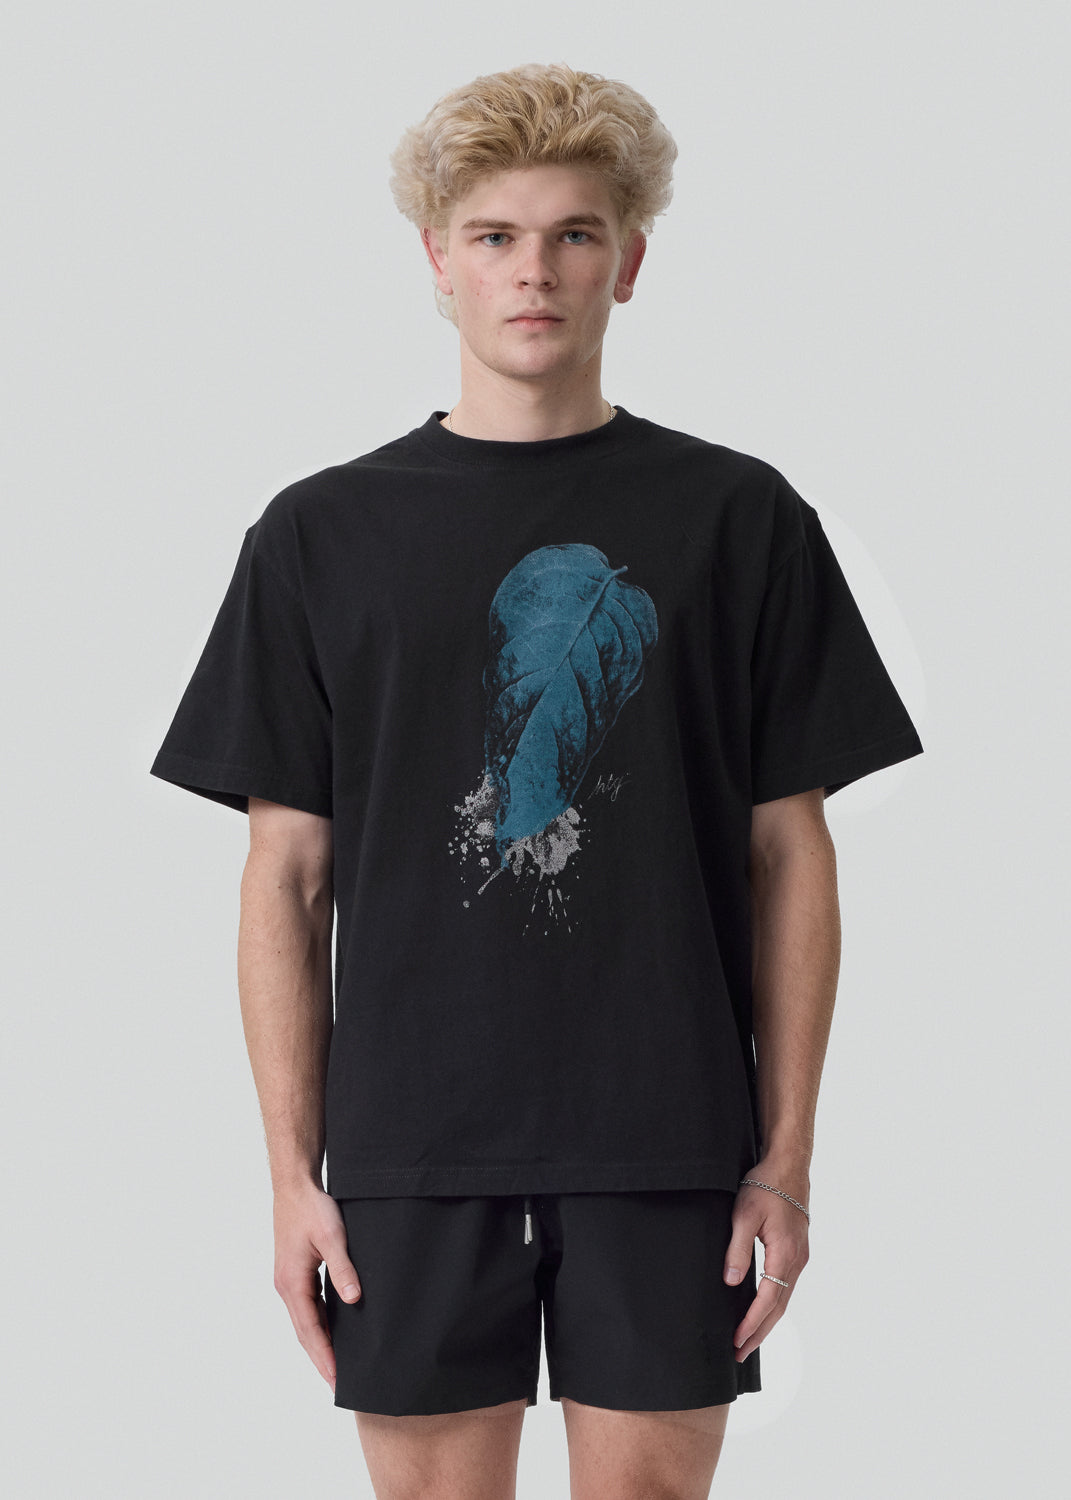 Honor the Gift - Black HTG Leaf T-Shirt | 1032 SPACE